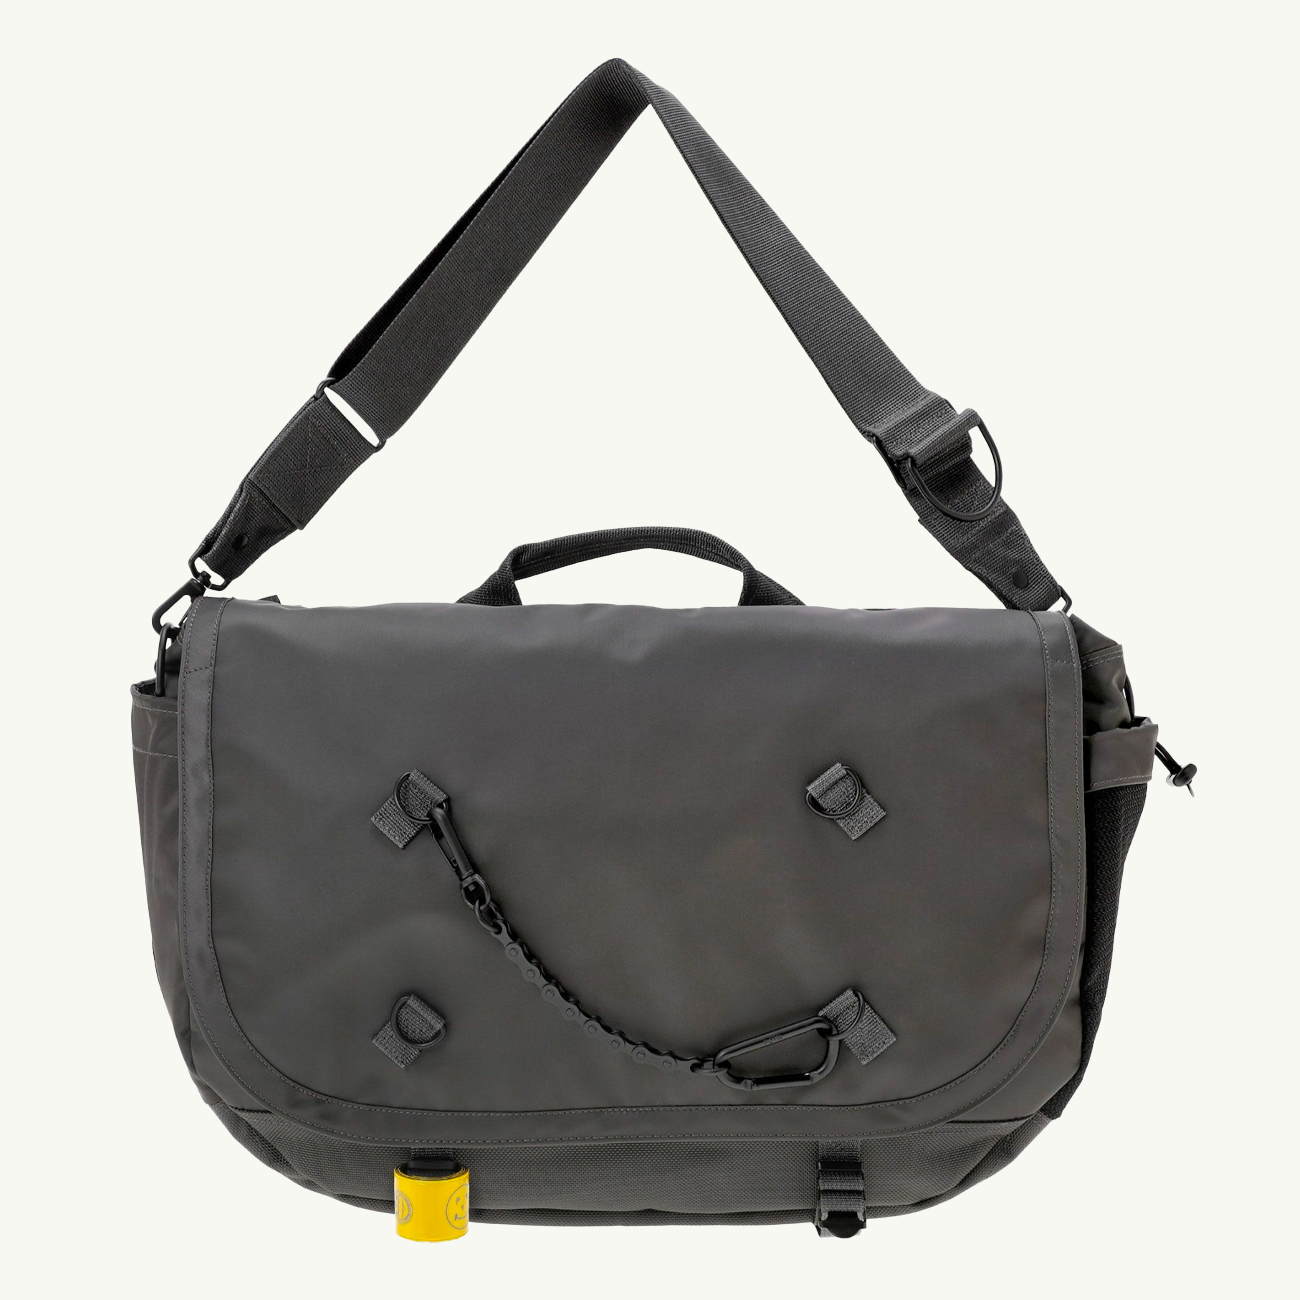 POTR/Ride Messenger Bag With Bicycle Chain - Graphite